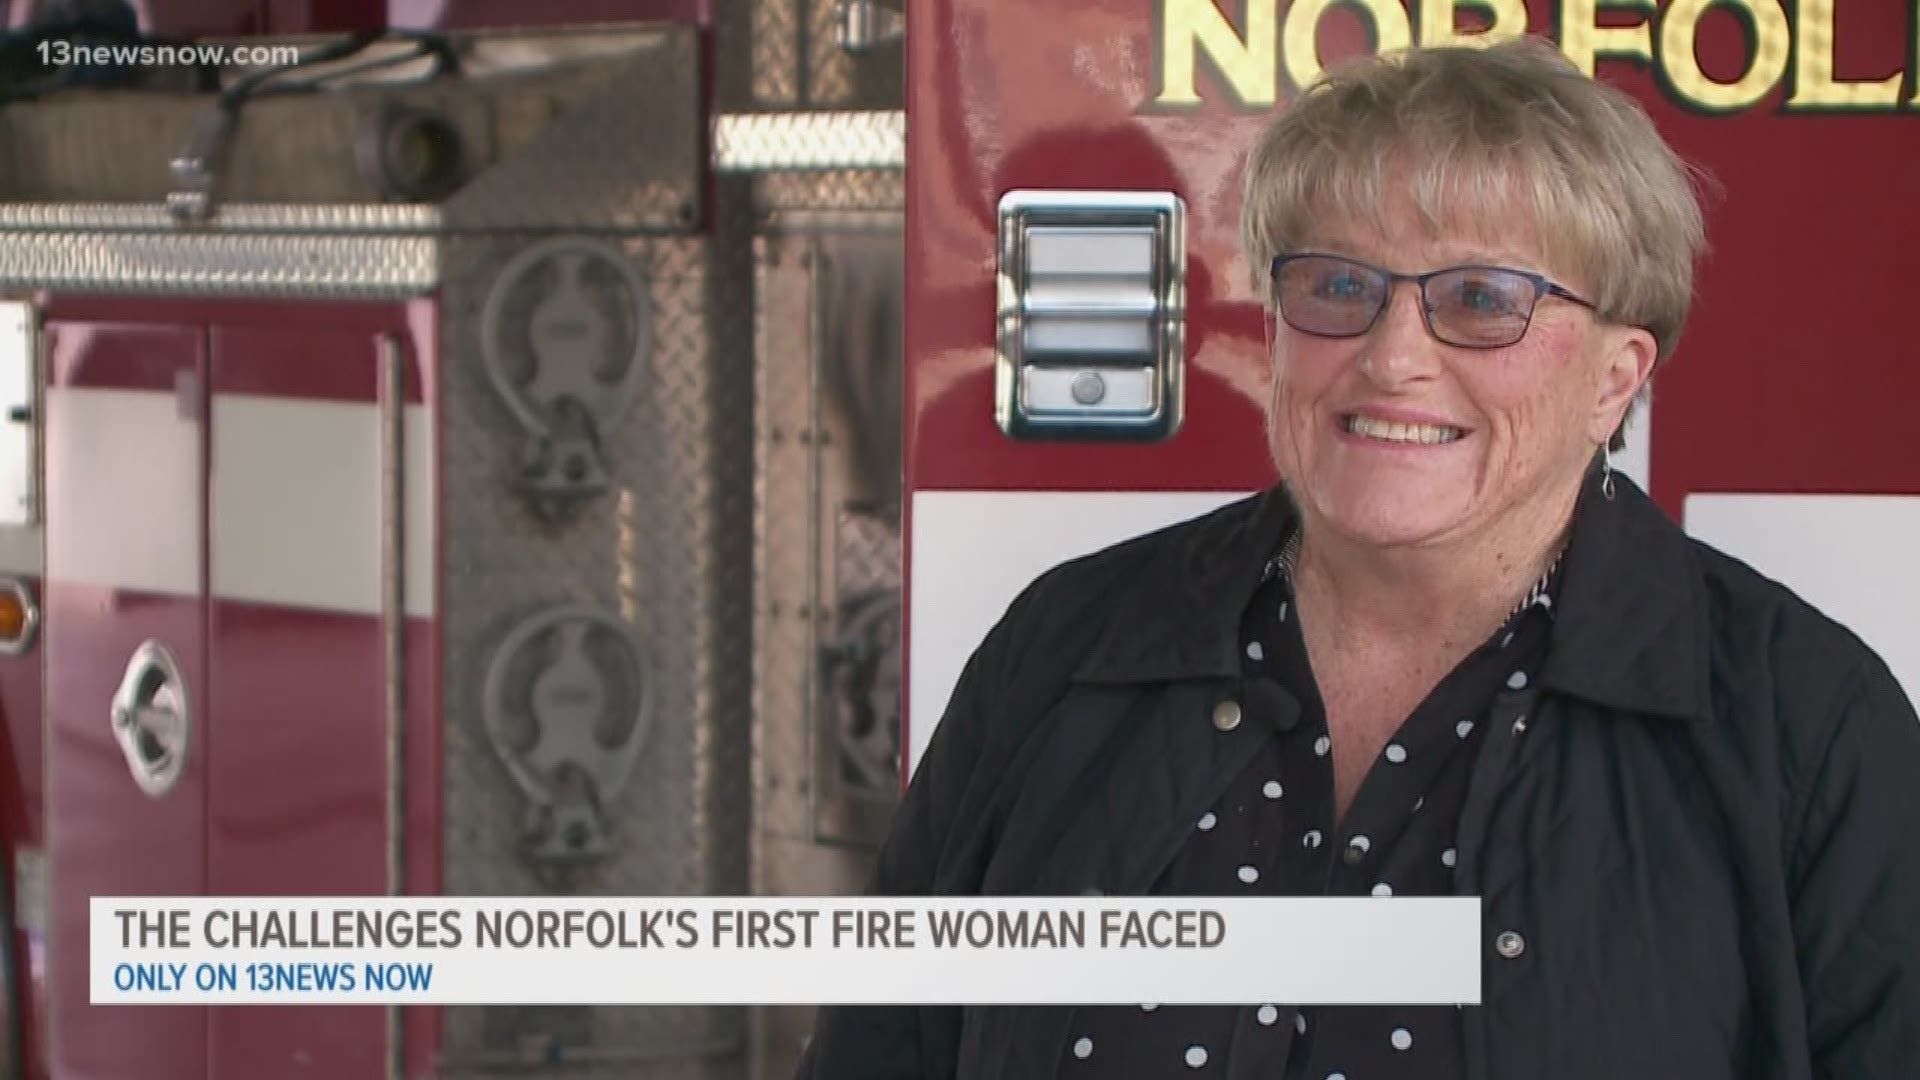 13News Now Madeline David spoke with Pamela Ells-Johnson who was the first woman to join the ranks of the Norfolk Fire Department in 1979.